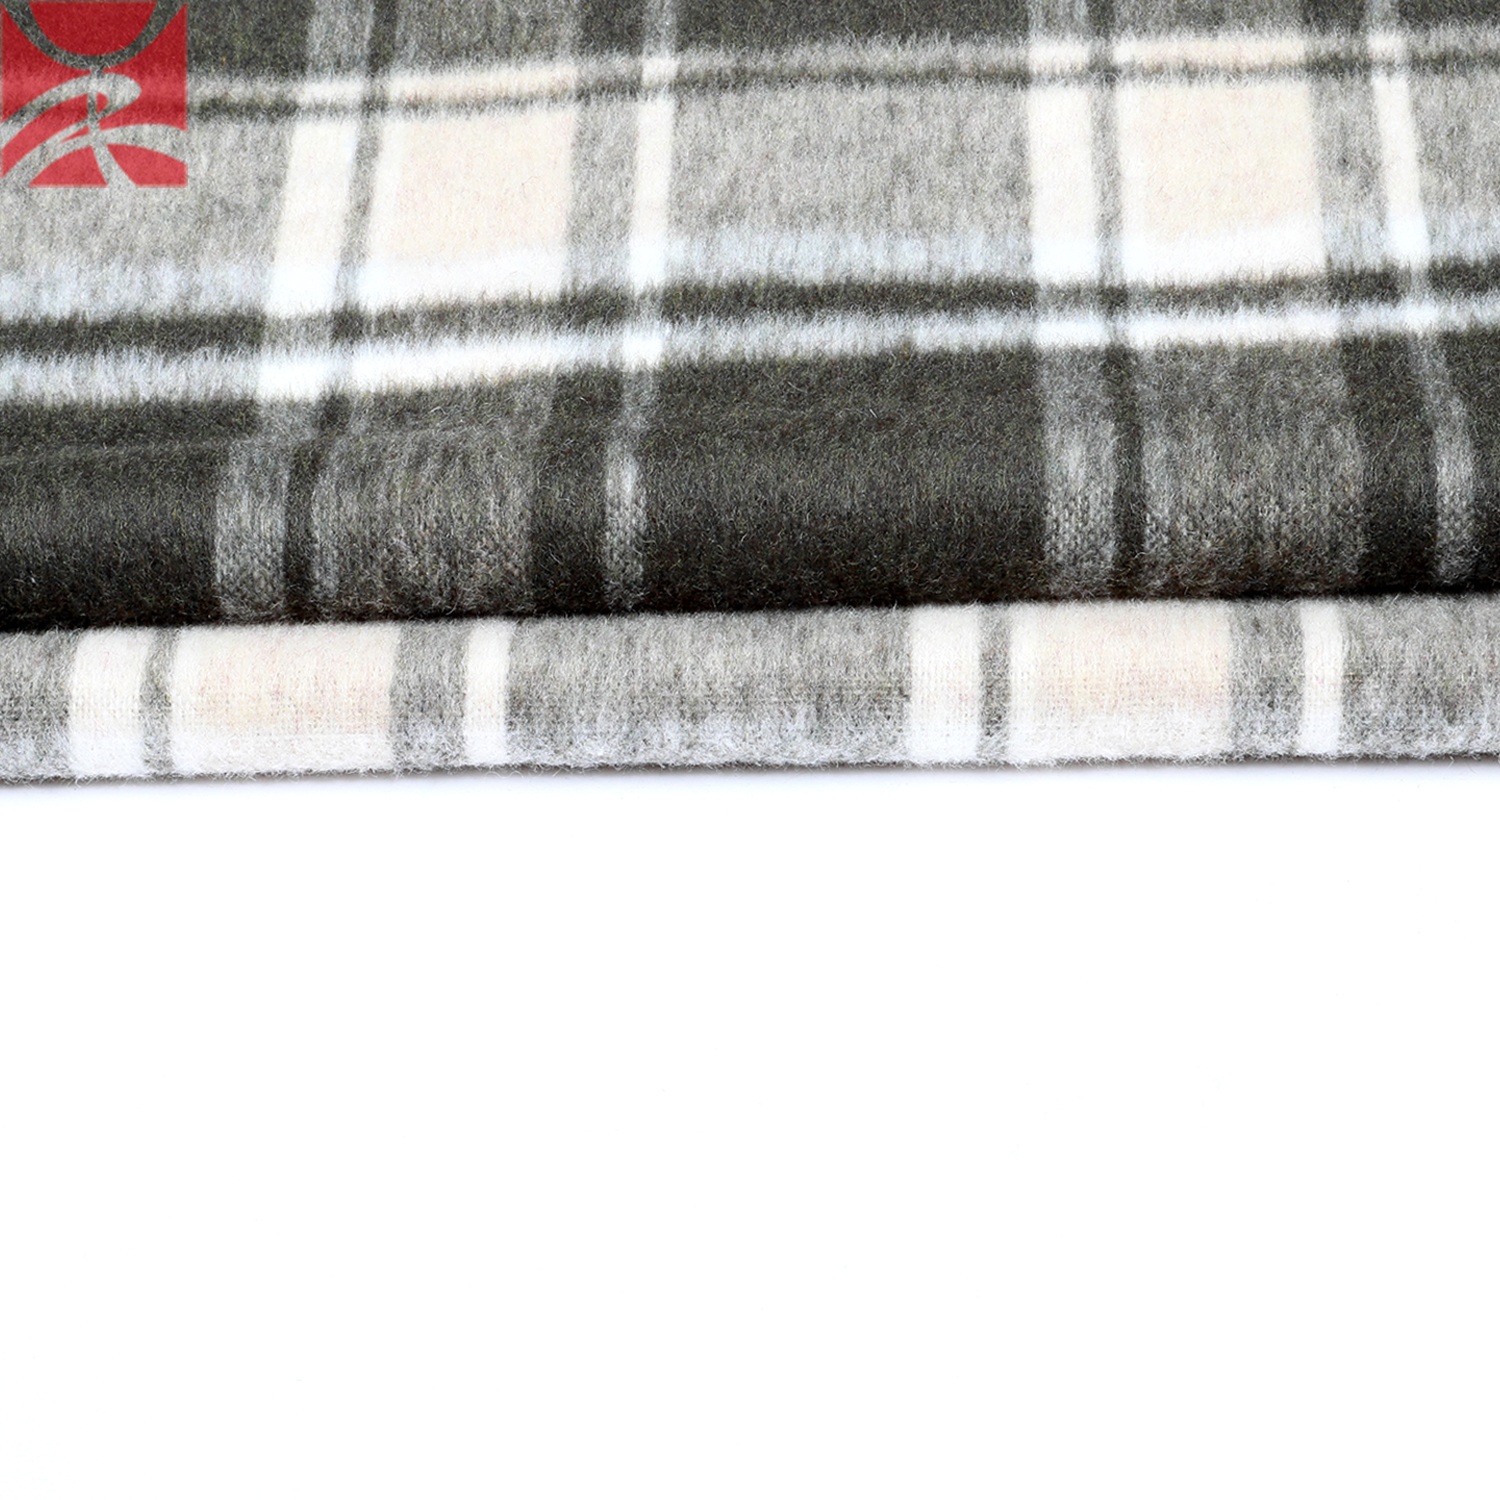 Hot Sale Woven Check Plaid Wool Flow Fabric para inverno Autumn Season Overs Cloat Clothing1